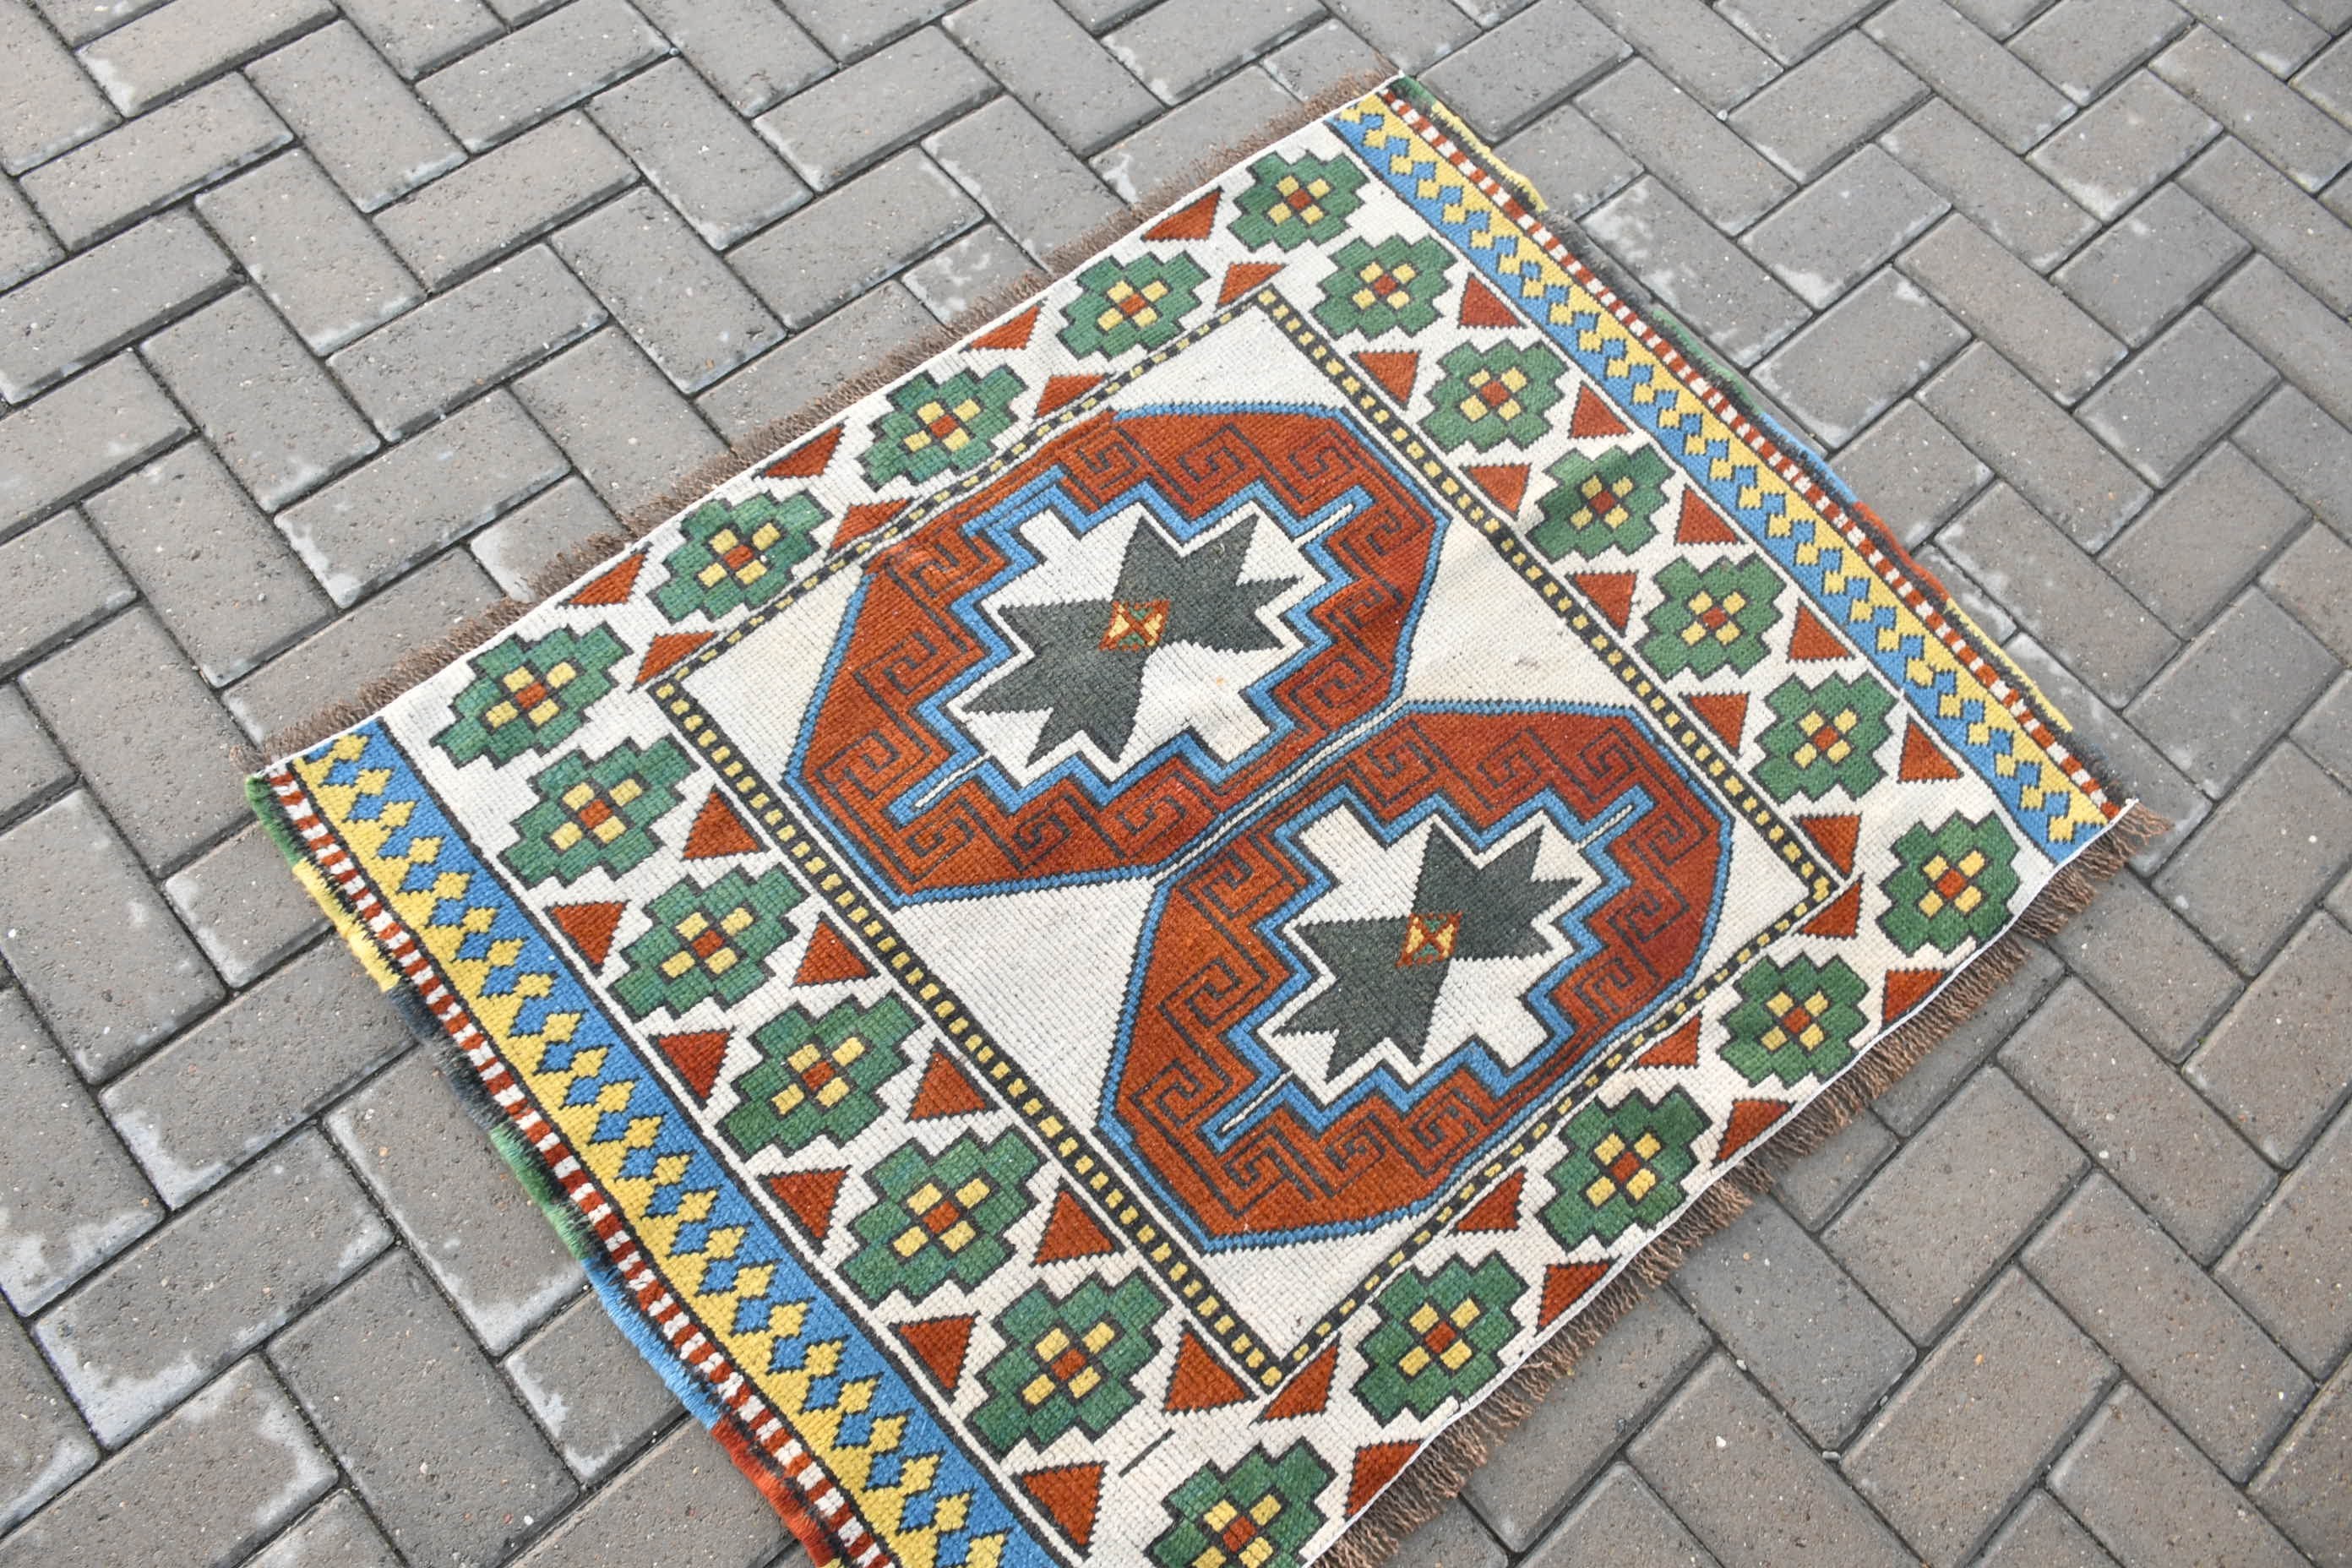 Anatolian Rug, Turkish Rugs, Wool Rug, Vintage Rugs, Entry Rug, Ethnic Rugs, White  3.7x2.8 ft Small Rugs, Car Mat Rugs